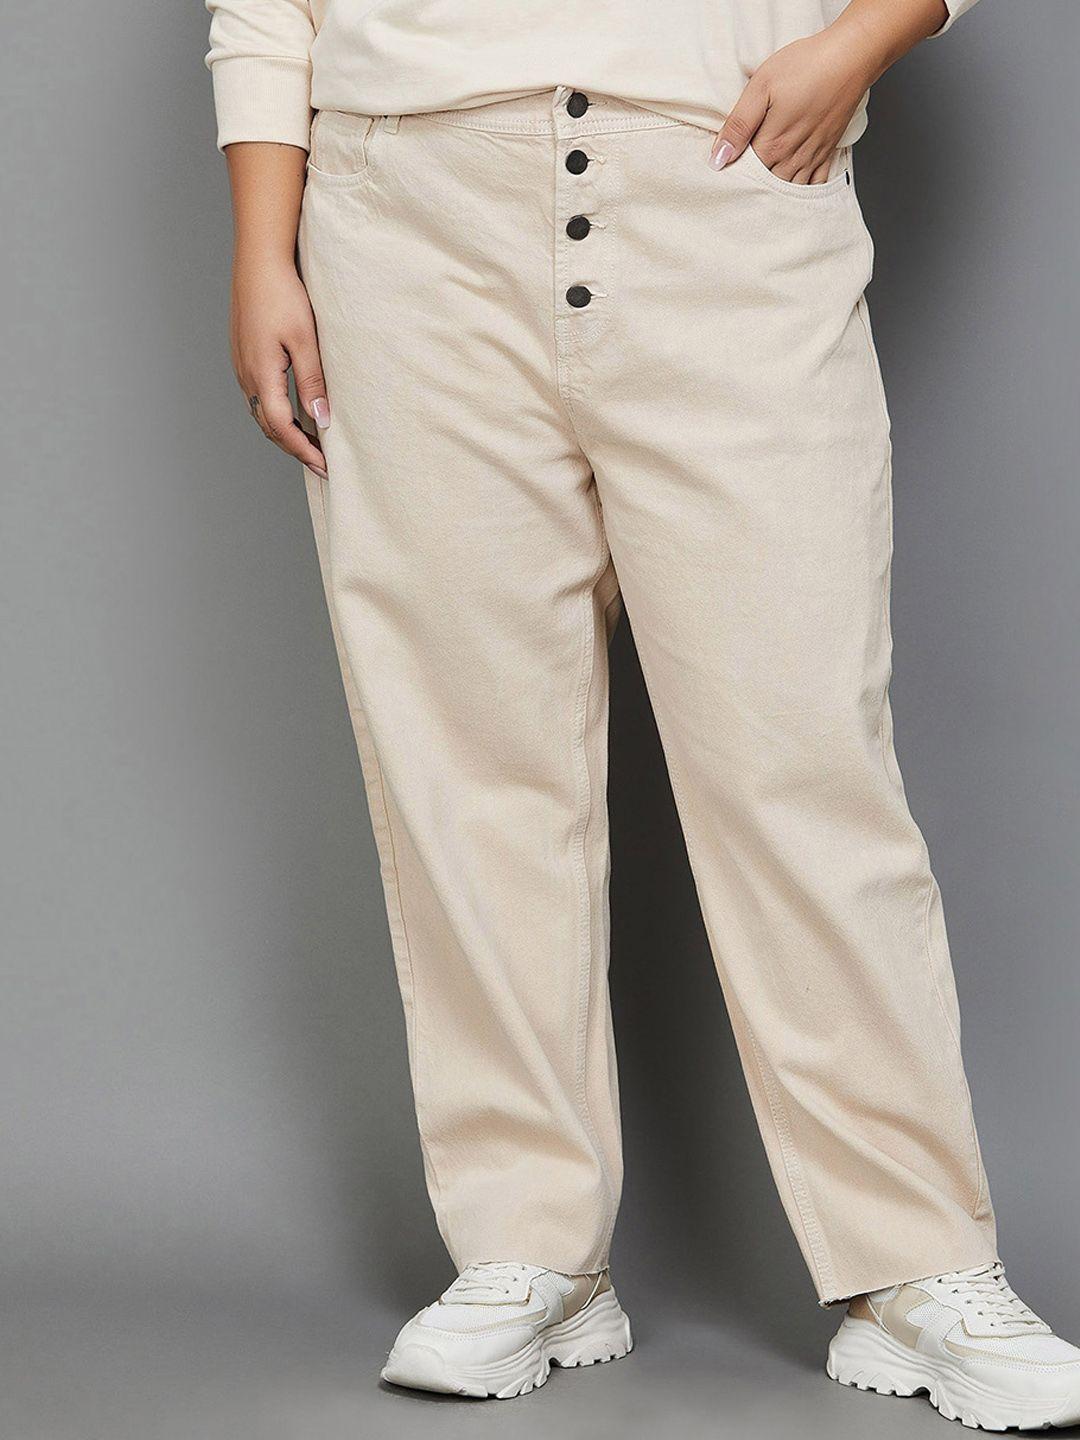 nexus-by-lifestyle-women-plus-size-mid-rise-coloured-shade-pure-cotton-clean-look-jeans